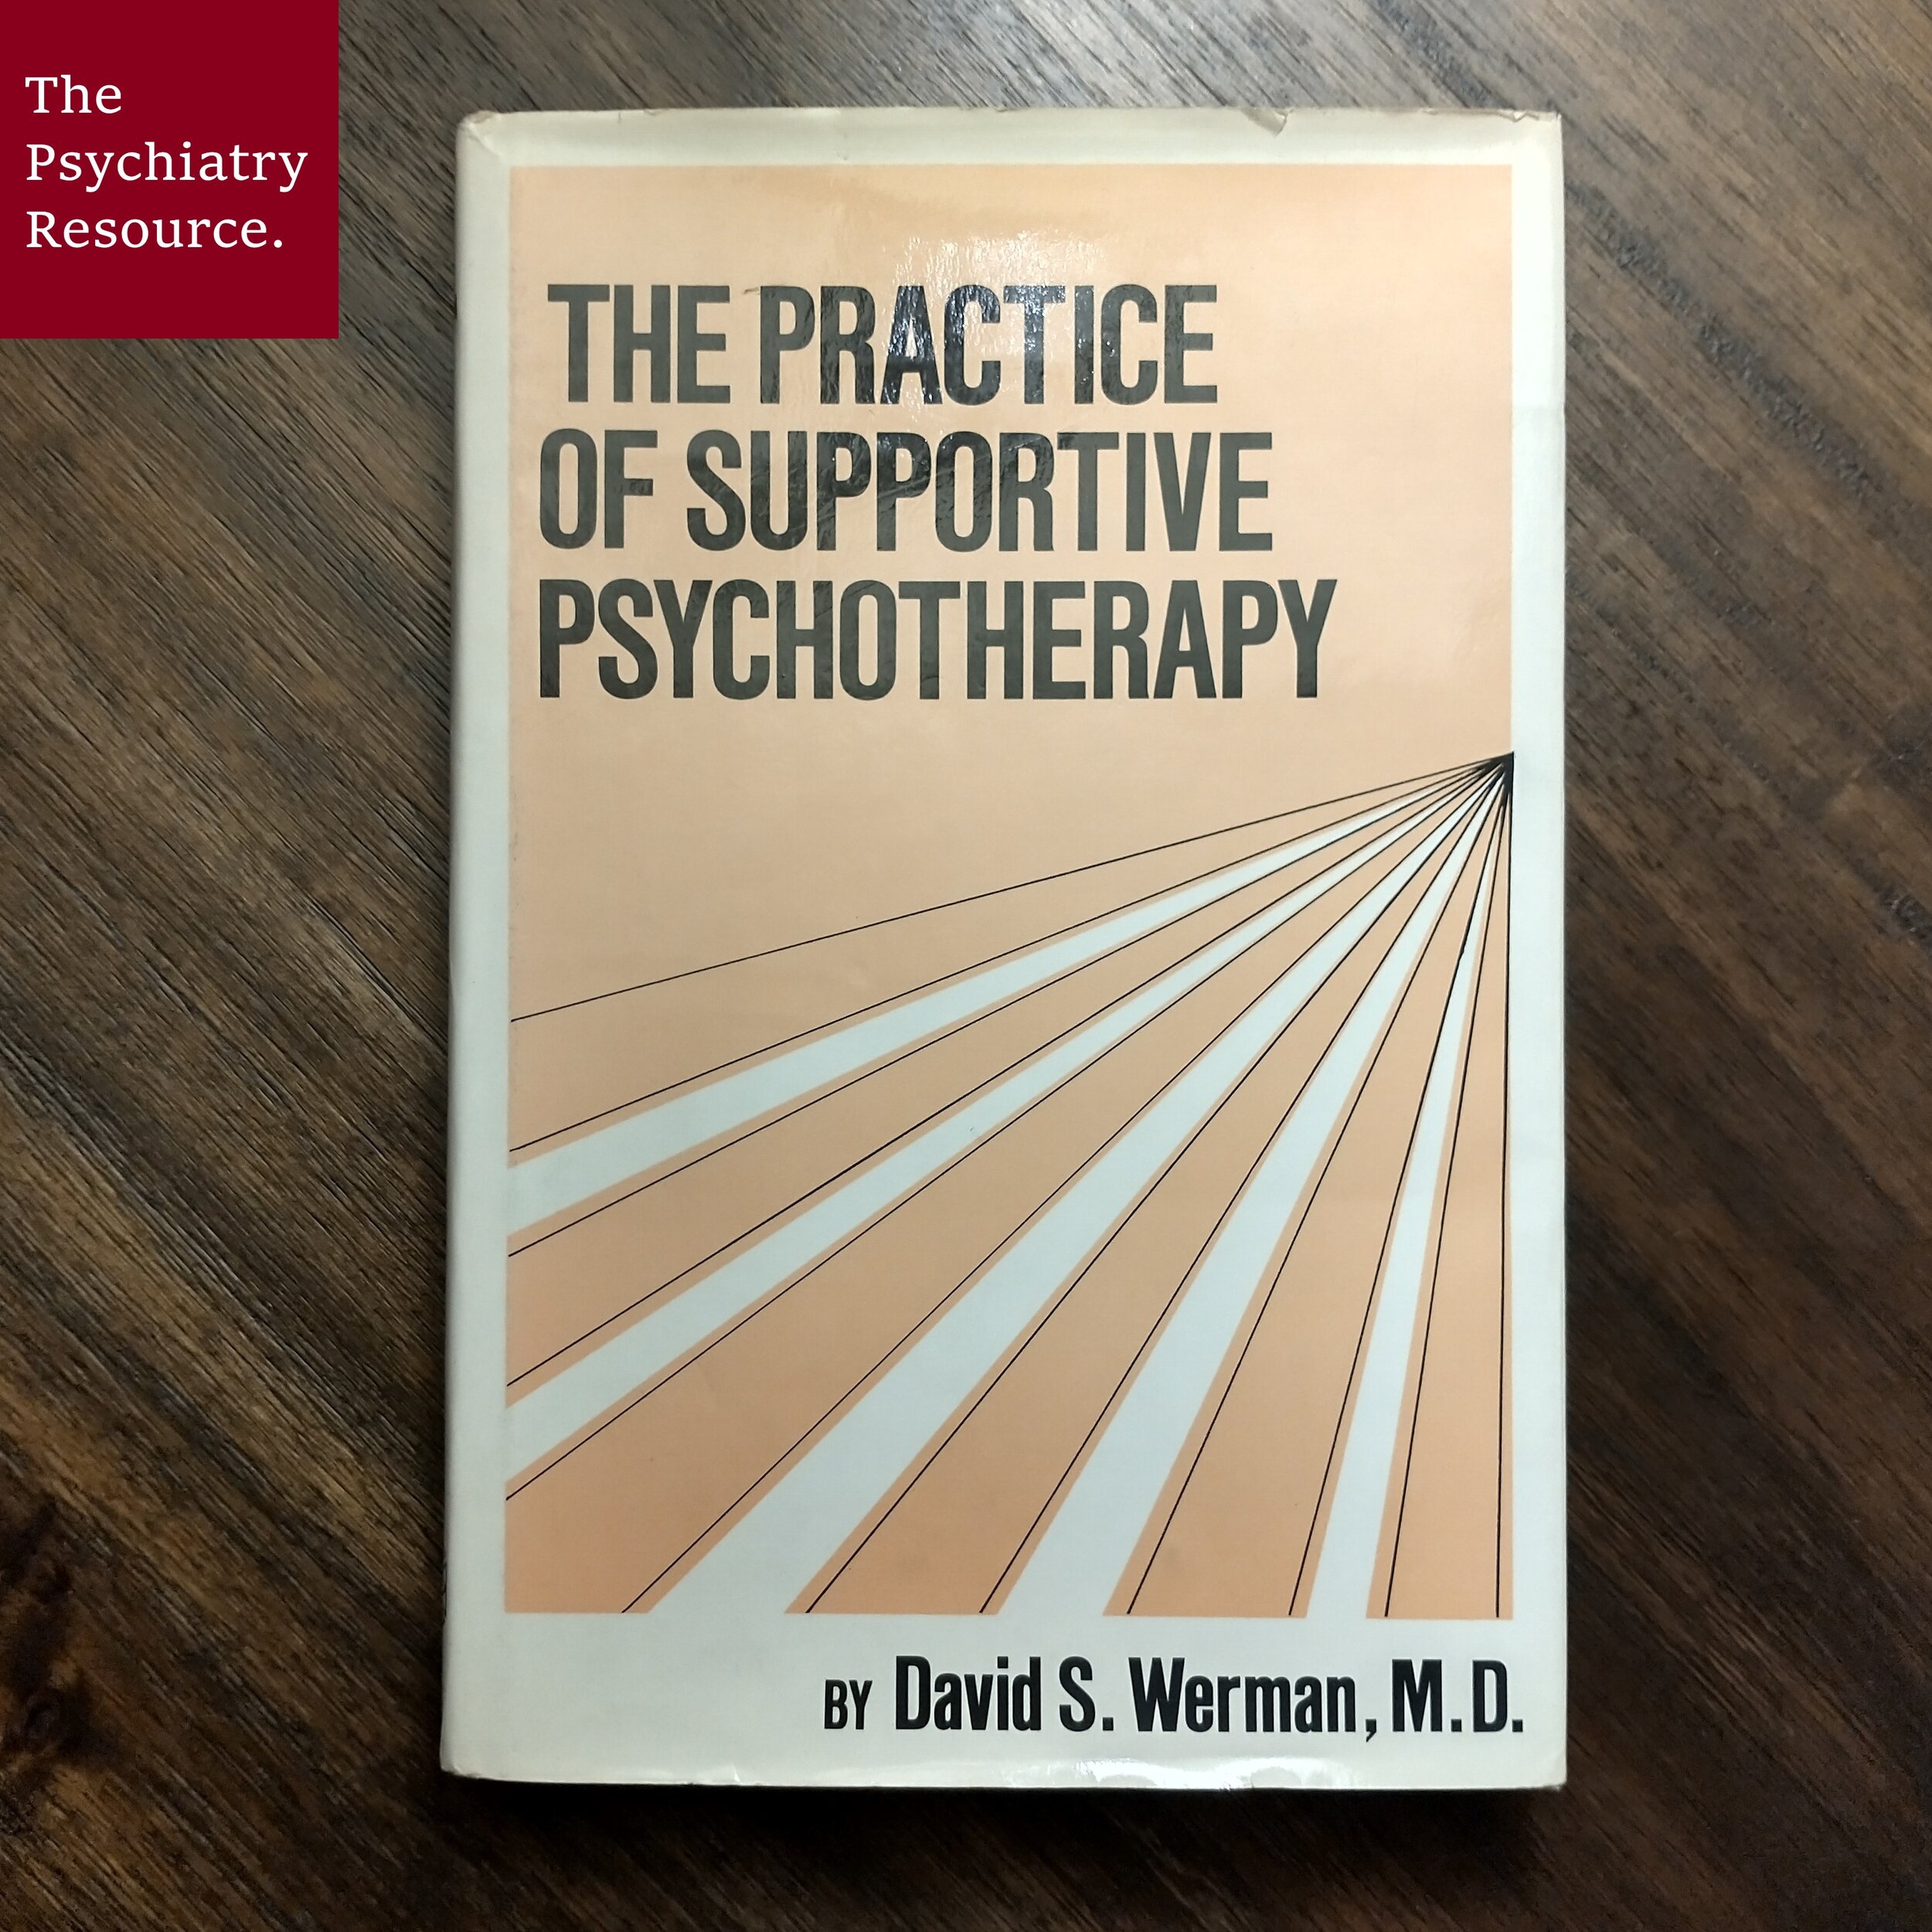 Book Review The Practice Of Supportive Psychotherapy — The Psychiatry